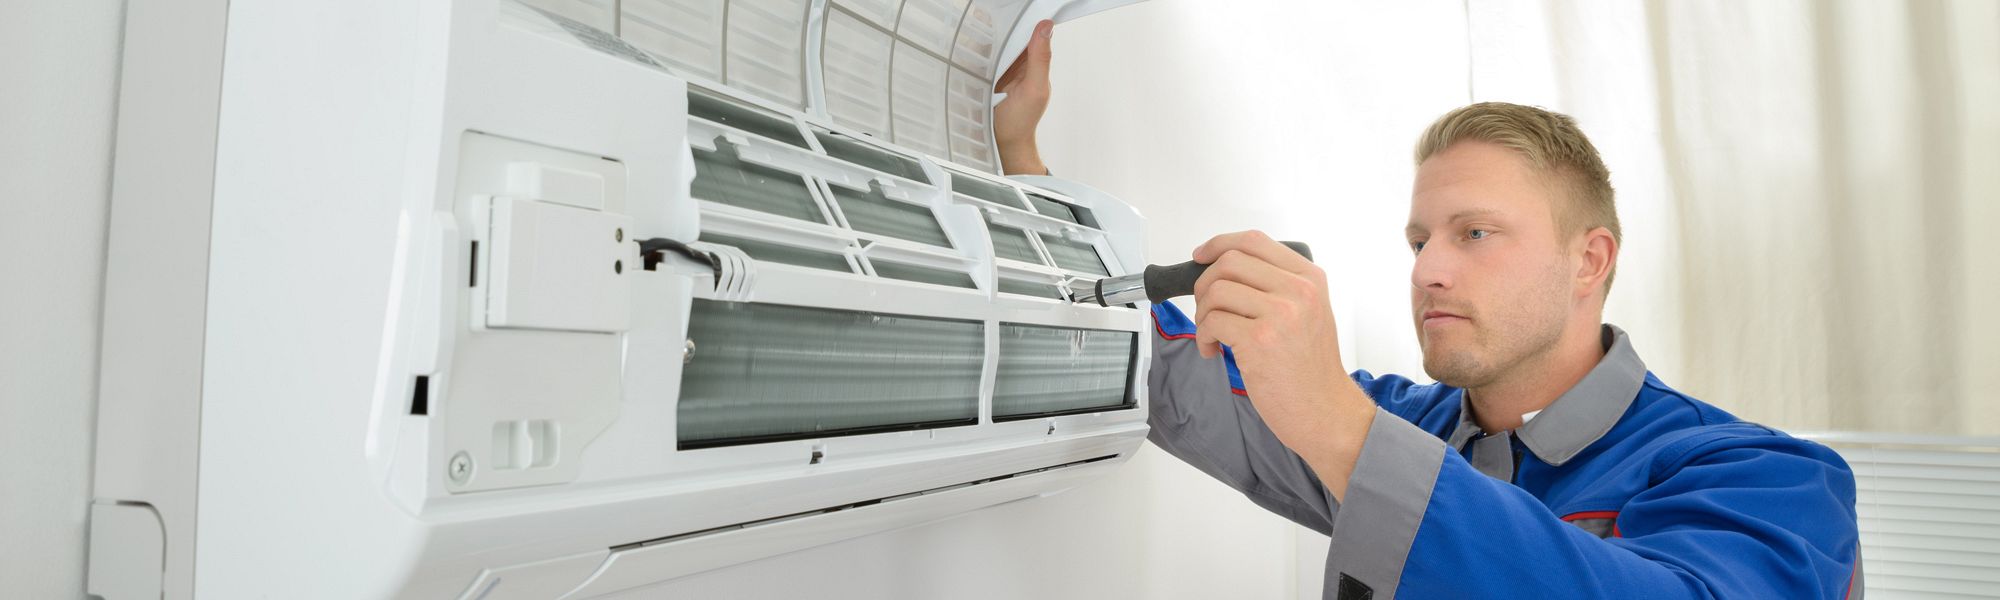 Getting Your Air Conditioner Ready for Summer